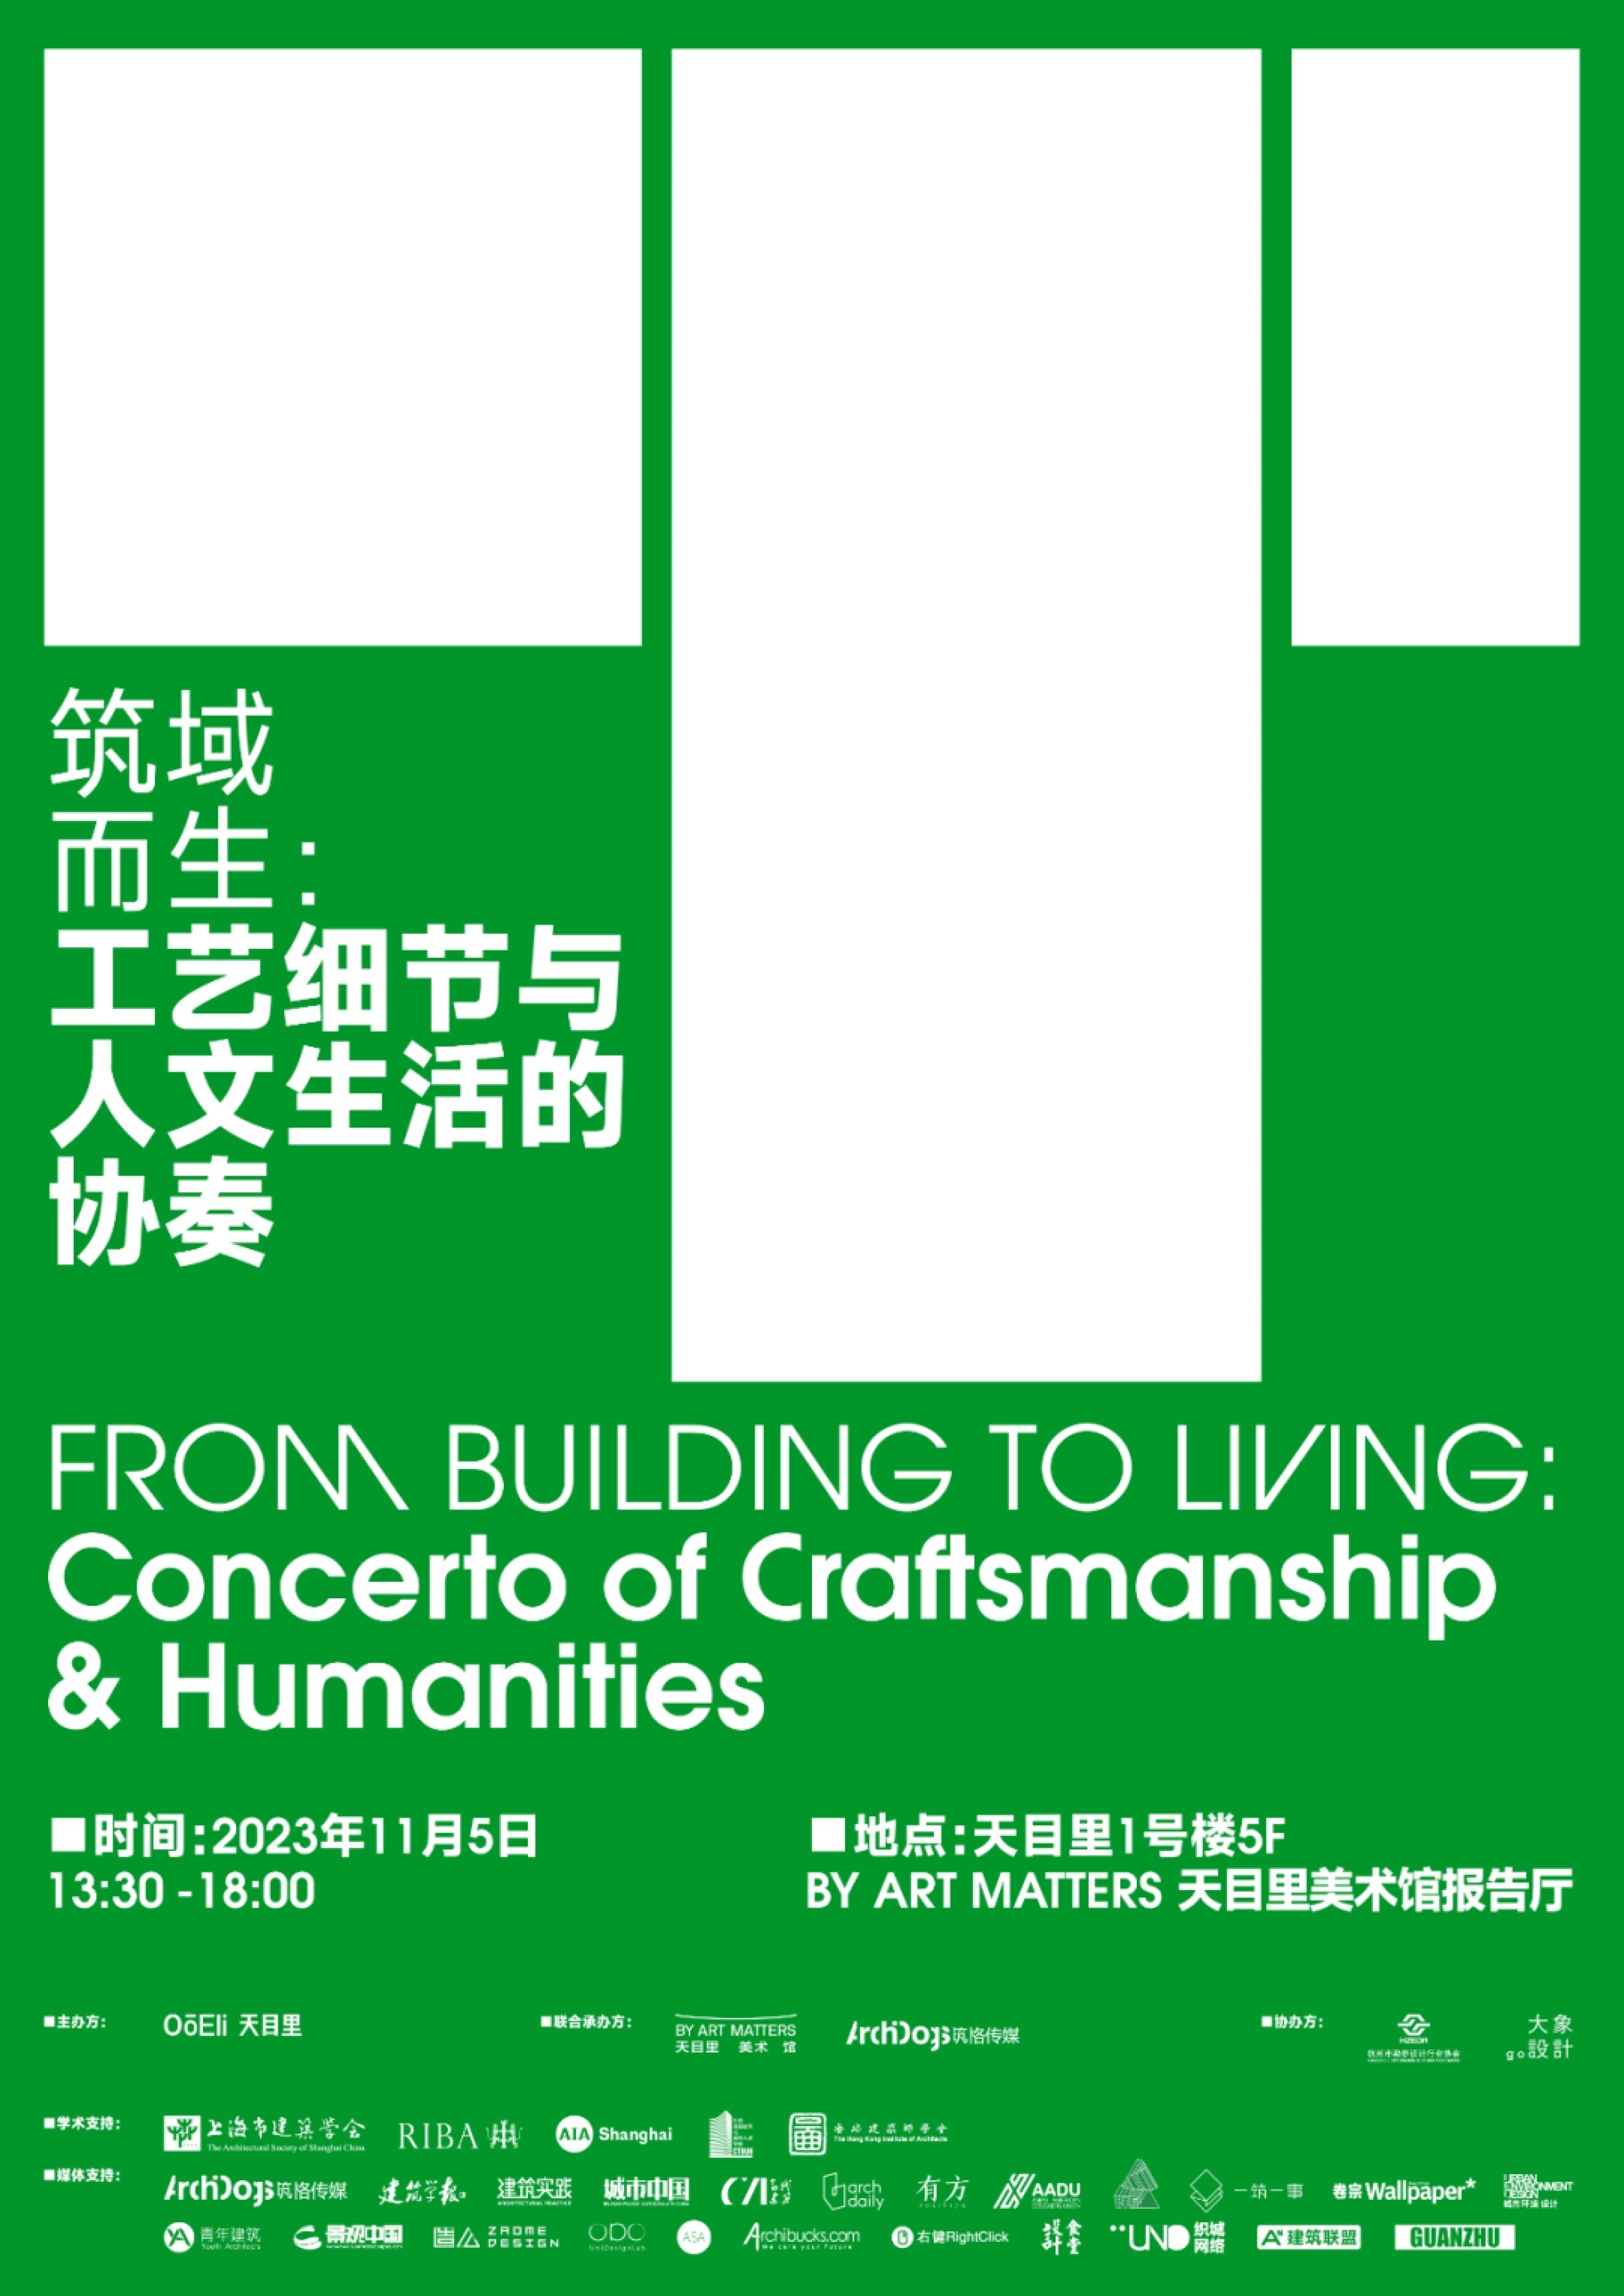 Zigeng Wang was Invited as a Roundtable Host to Attend the “Renzo Piano Architecture Studio - From Building to Living" Exhibition and Architecture Forum in the Art Museum BY ART MATTERS, Hangzhou